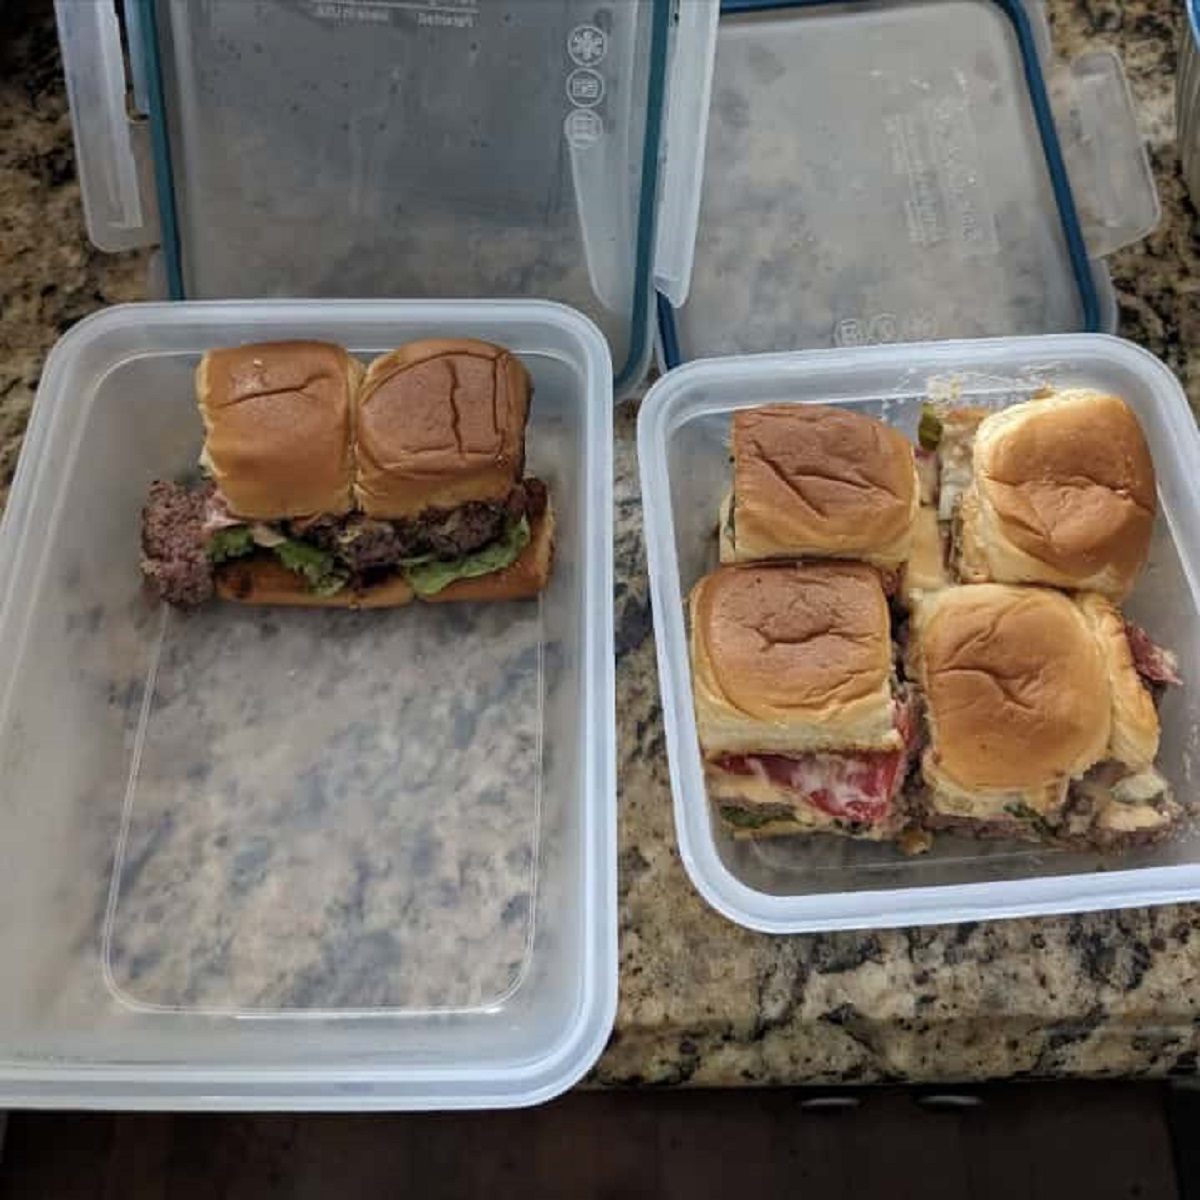 We had 6 sliders left over from dinner last night, and this is how my fiance stored the leftovers…